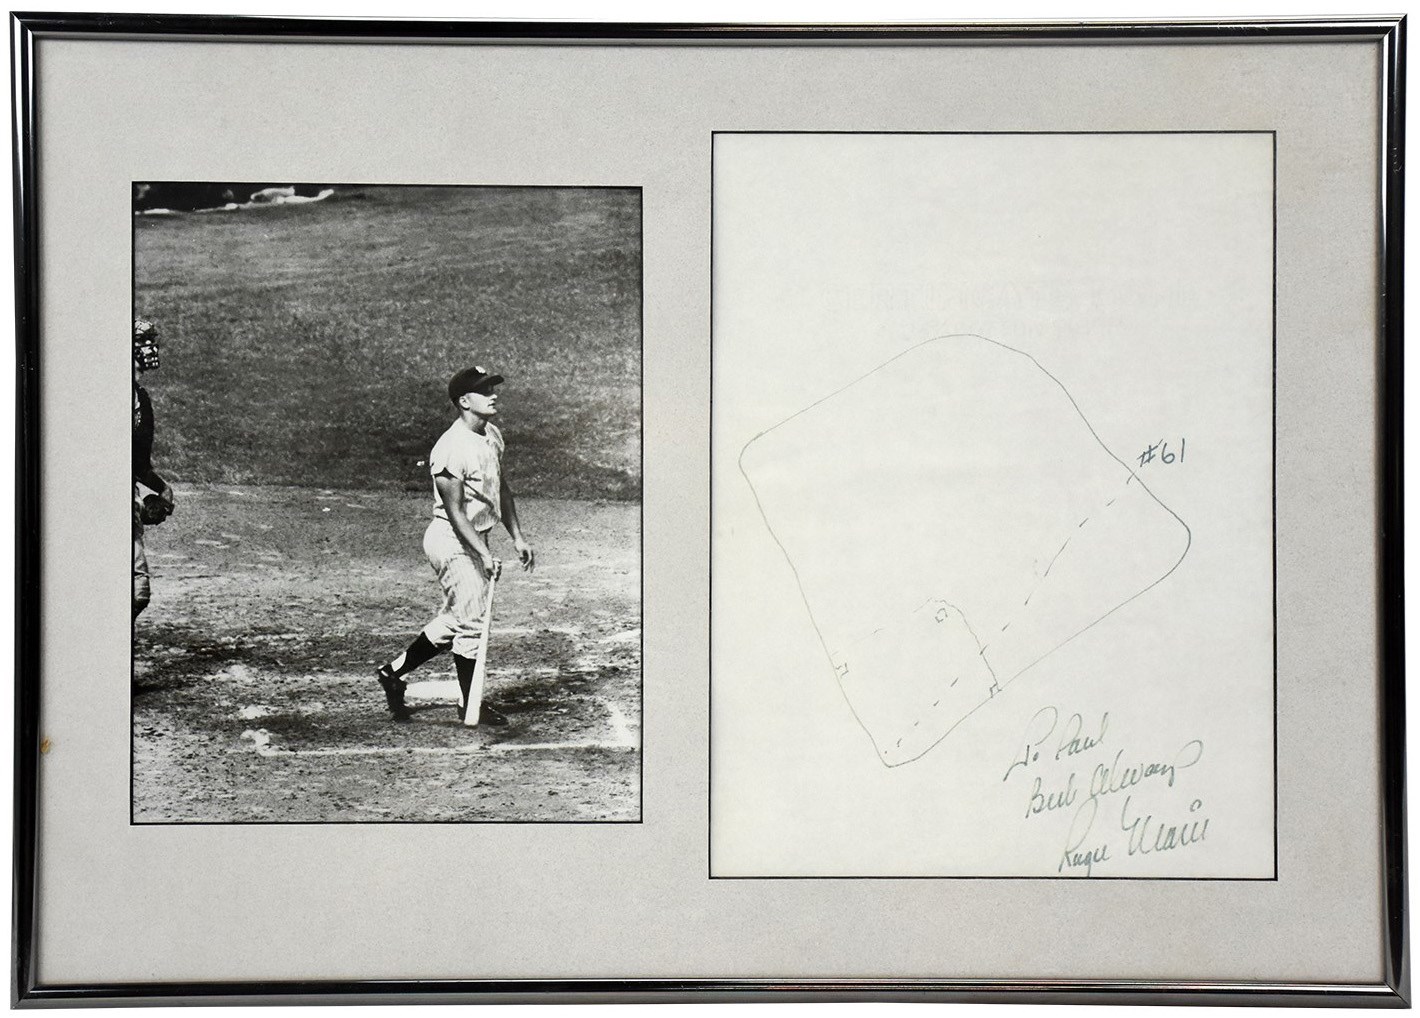 Mantle and Maris - Roger Maris Signed "#61" Home Run Sketch (PSA)